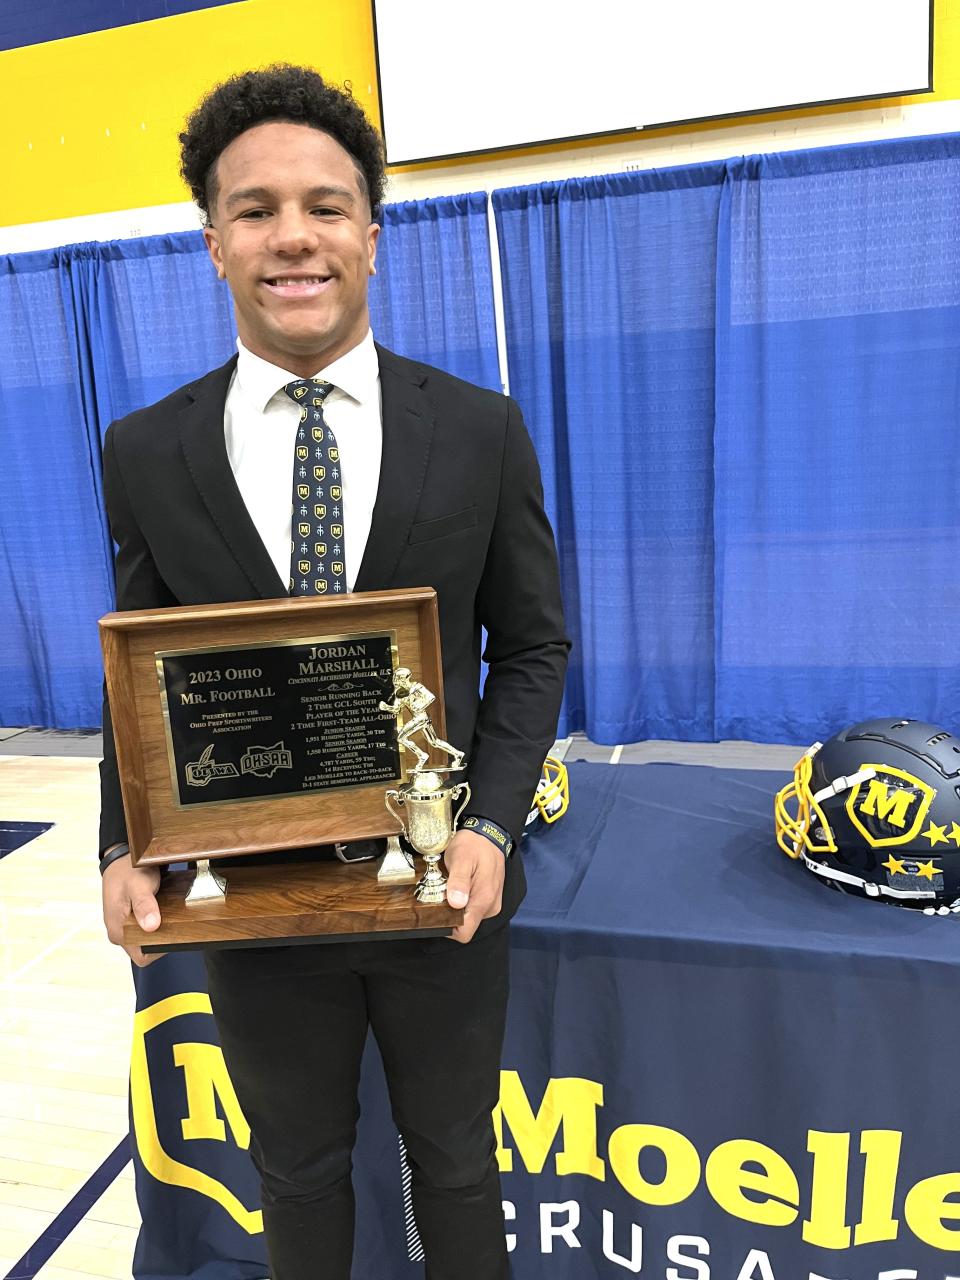 Moeller senior Jordan Marshall with the Mr. Football trophy as Moeller senior Jordan Marshall was given the trophy for Ohio Mr. Football by the Ohio High School Athletic Assocation Dec. 6, 2023 in the Moeller gymnasium.